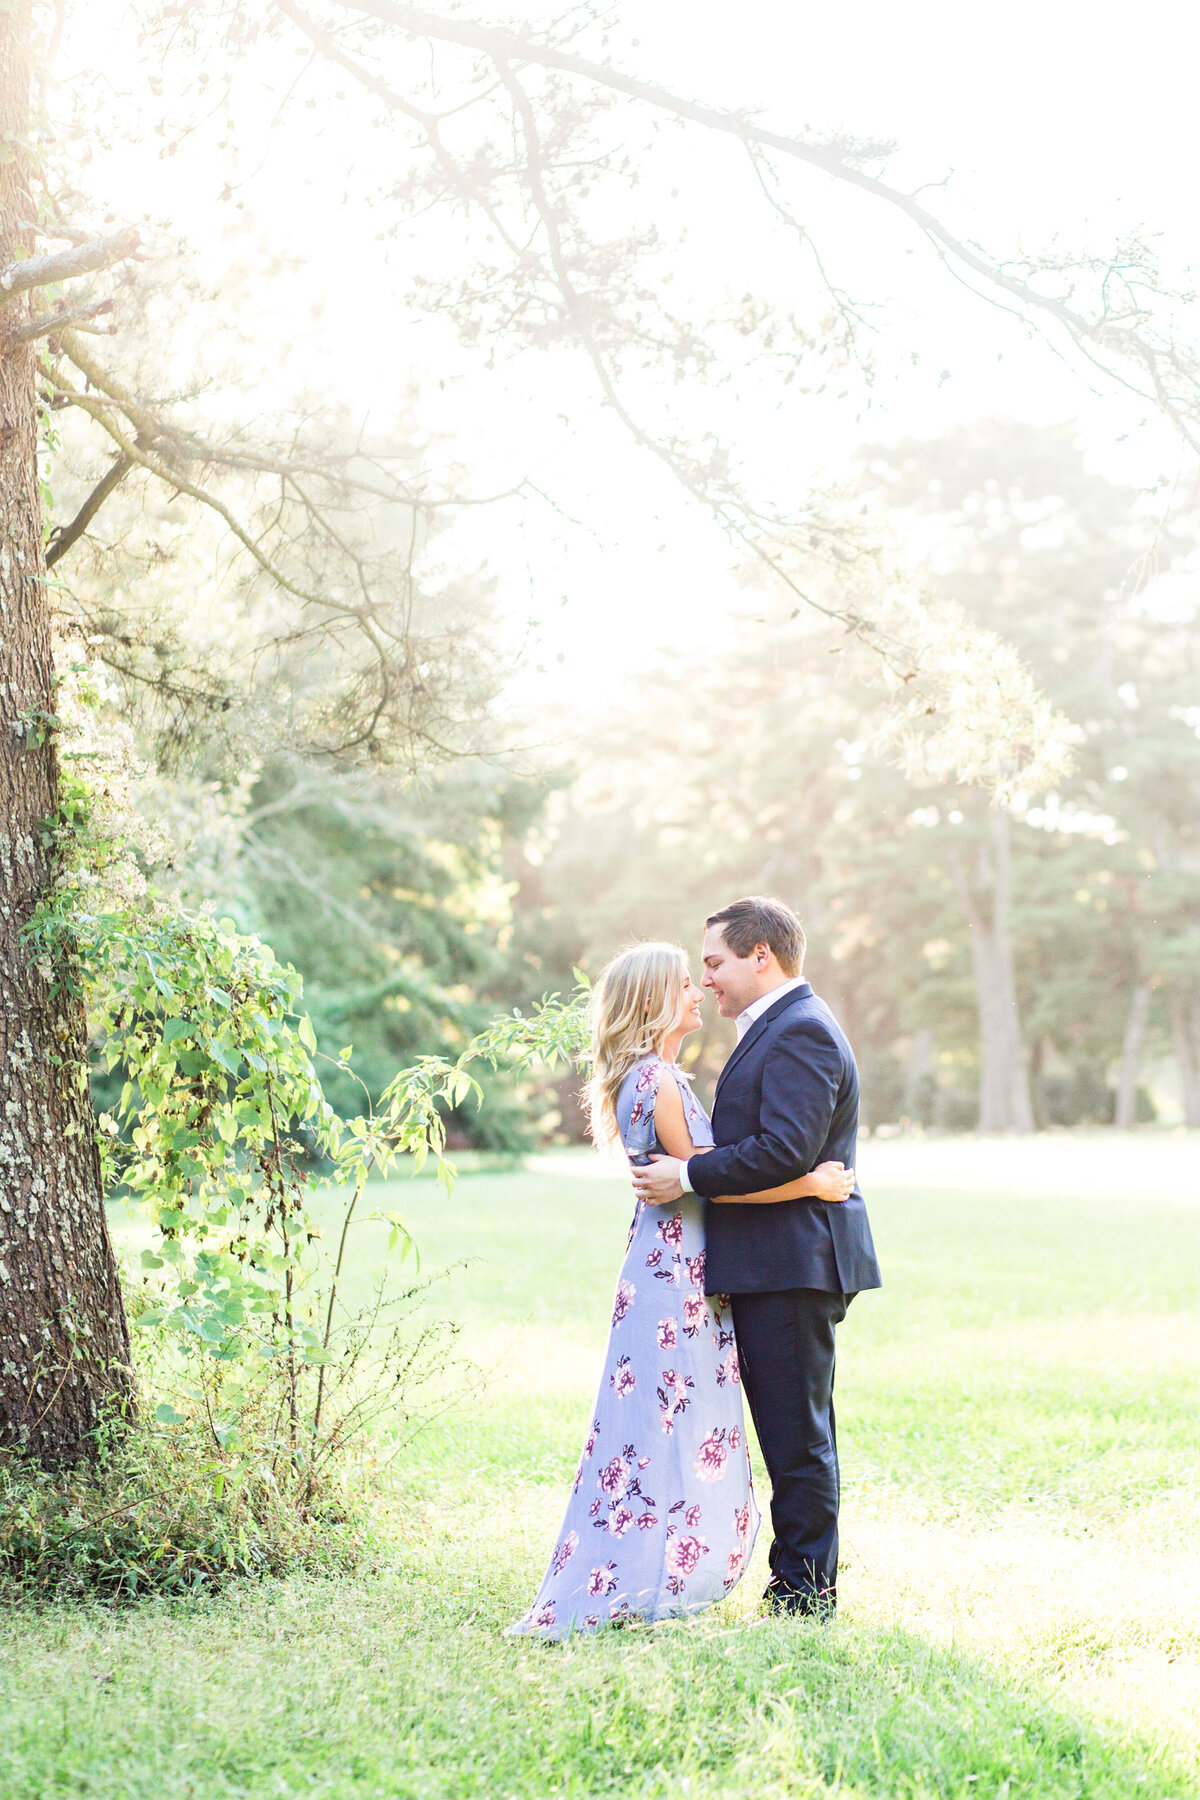 Renee Lorio Photography South Louisiana Wedding Engagement Light Airy Portrait Photographer Photos Southern Clean Colorful13